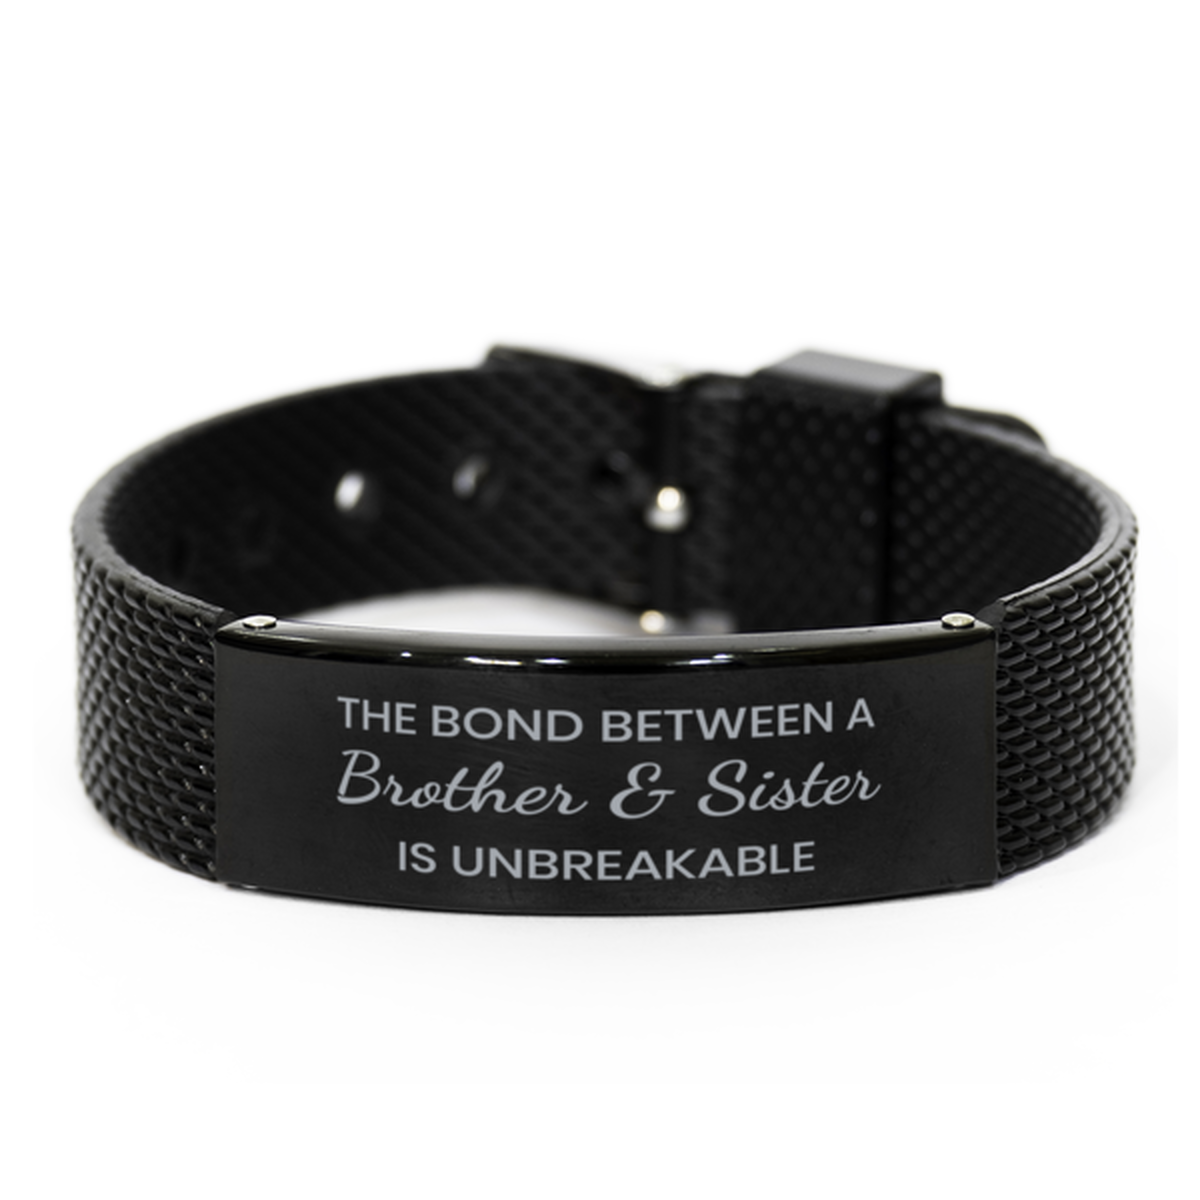 The Bond Between a Brother and Sister is Unbreakable Bracelet, Sister Brother Bracelet, Black Stainless Steel Leather Bracelet, Christmas.